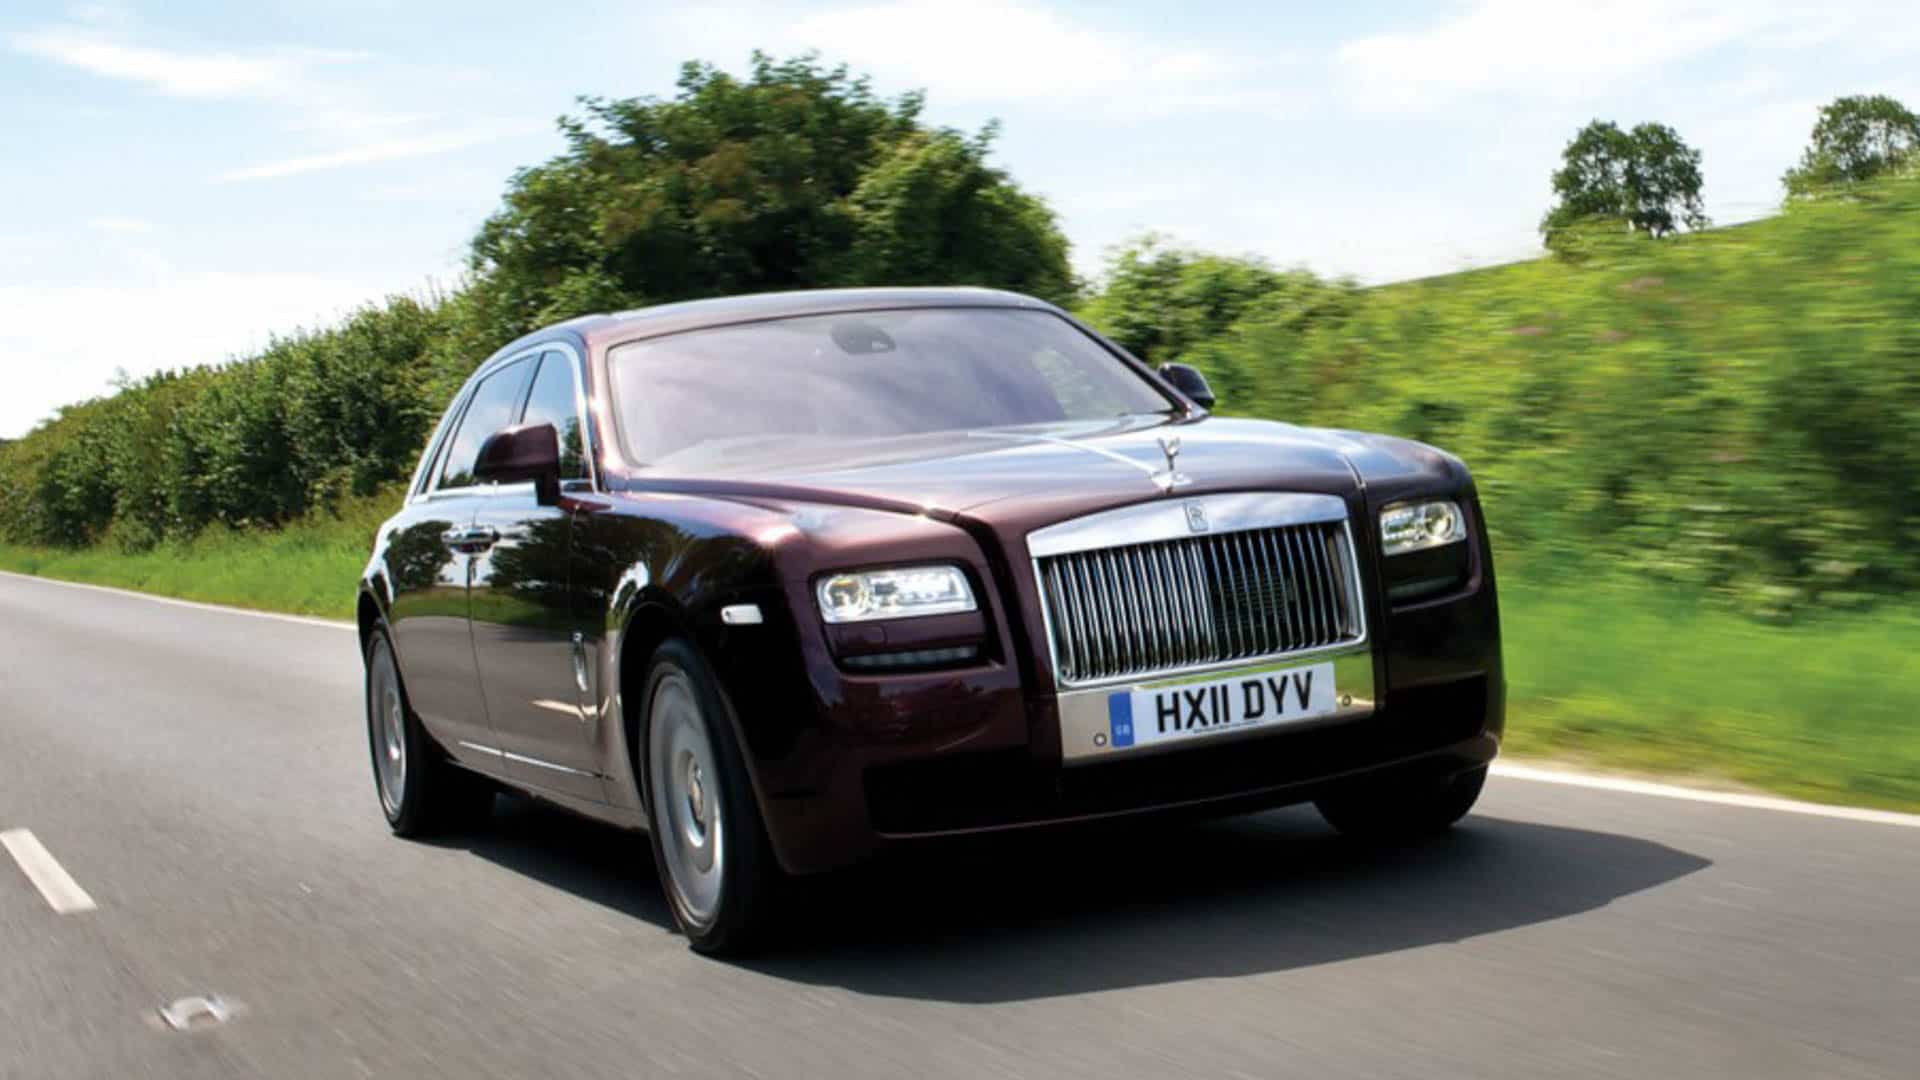 VIDEO: Doug DeMuro Drives the Rolls-Royce Ghost—The Most Affordable Rolls